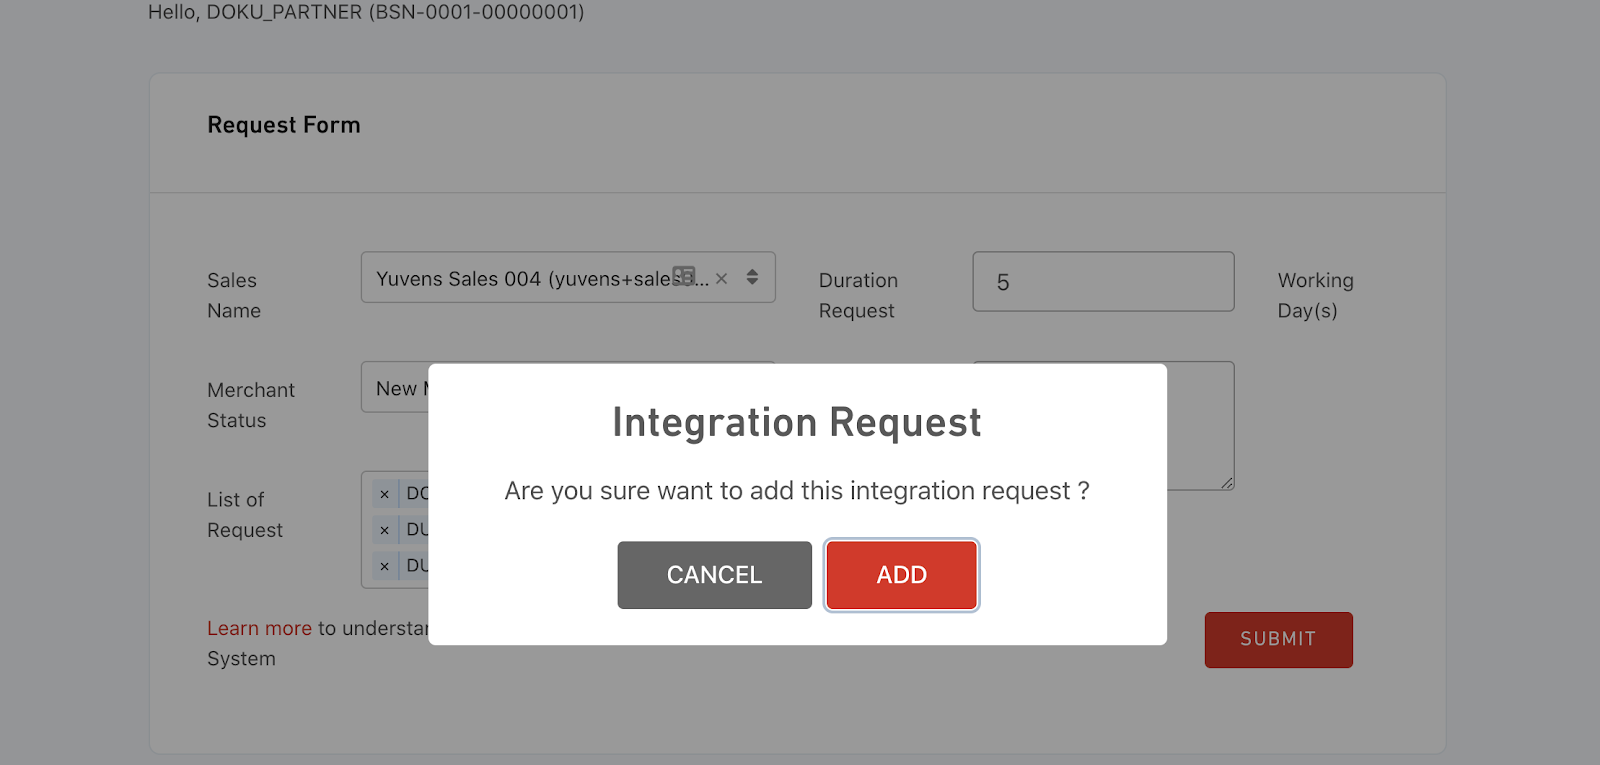 Pop-Up Message when insert new request form